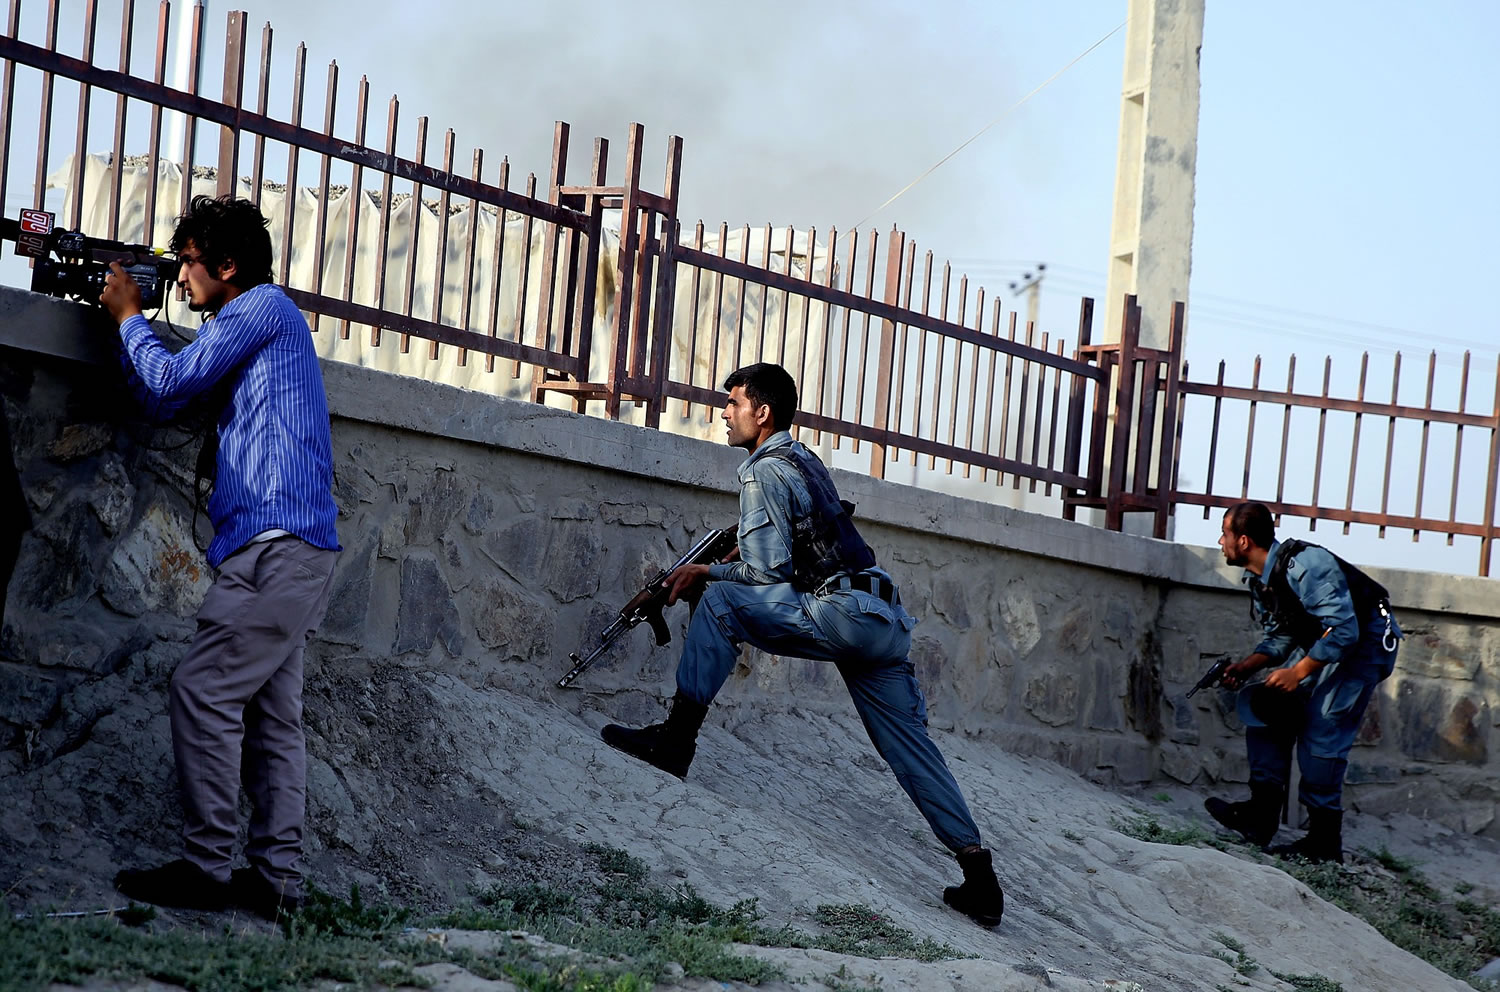 Afghan security forces and a journalist take cover during clashes with Taliban fighters in Kabul, Afghanistan, Thursday, July 17, 2014. Gunmen launched a pre-dawn attack on the Kabul International Airport in the Afghan capital on Thursday, raining down rockets, setting off a gunbattle with security forces and forcing the airport to close for hours, officials said. The militants occupied two buildings which were under construction some 700 meters (yards) north of the facility, and were using them as a base to direct rockets and gunfire toward the airport and international jet fighters flying over Kabul, said Afghan army Gen. Afzal Aman.